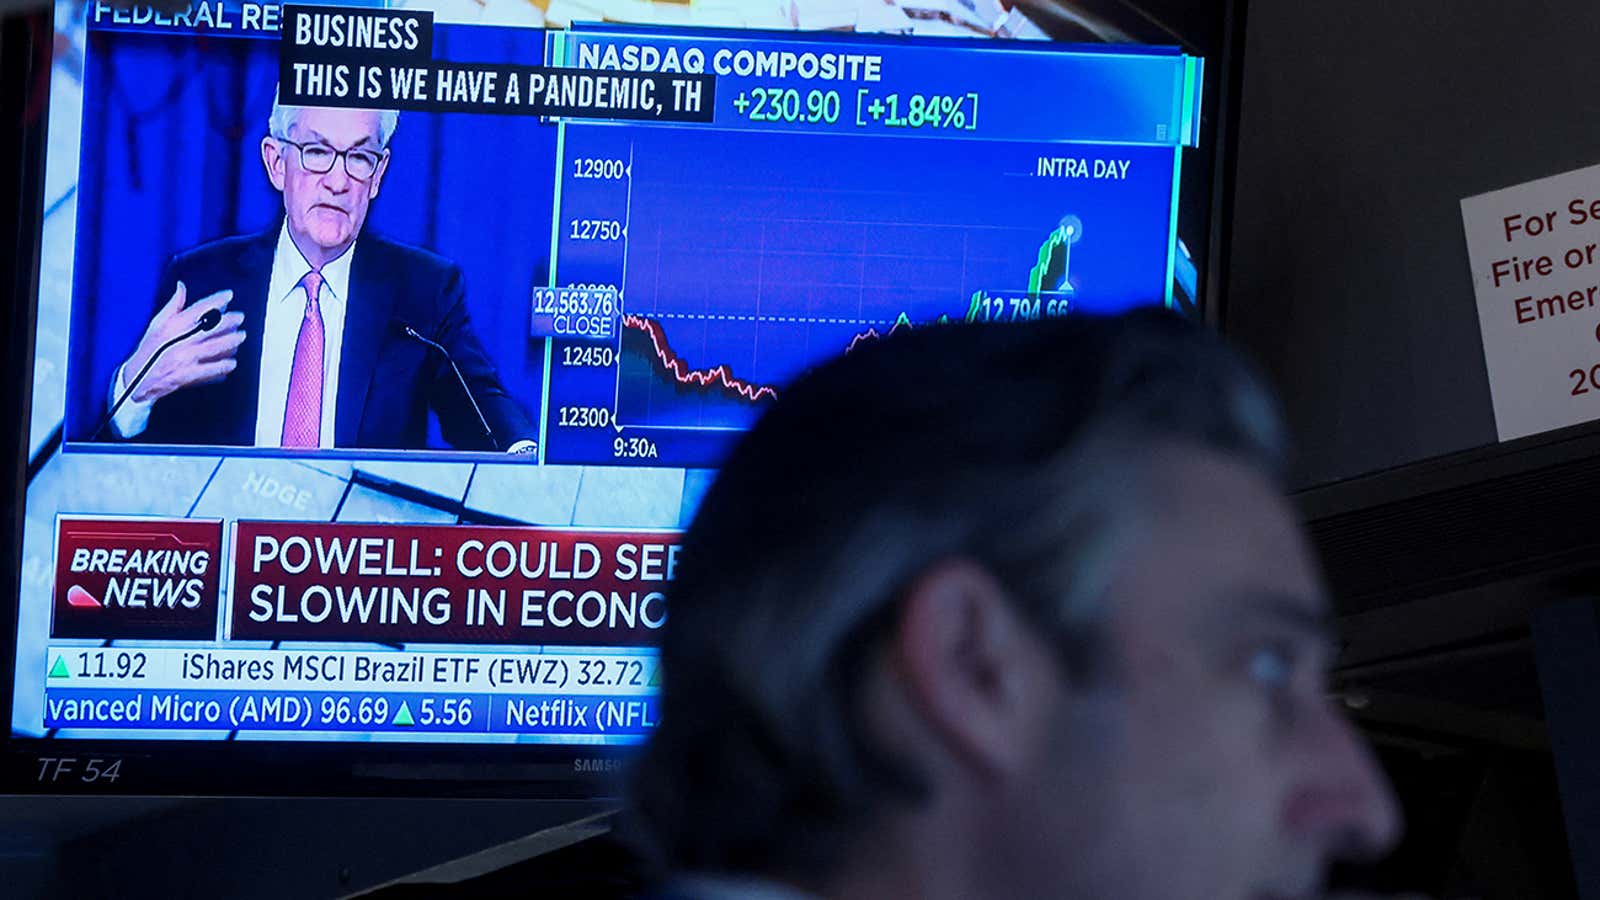 A trader works, as Federal Reserve Chair Jerome Powell is seen delivering remarks on a screen, on the floor of the New York Stock Exchange (NYSE) in New York City, U.S. May 4, 2022. REUTERS/Brendan McDermid